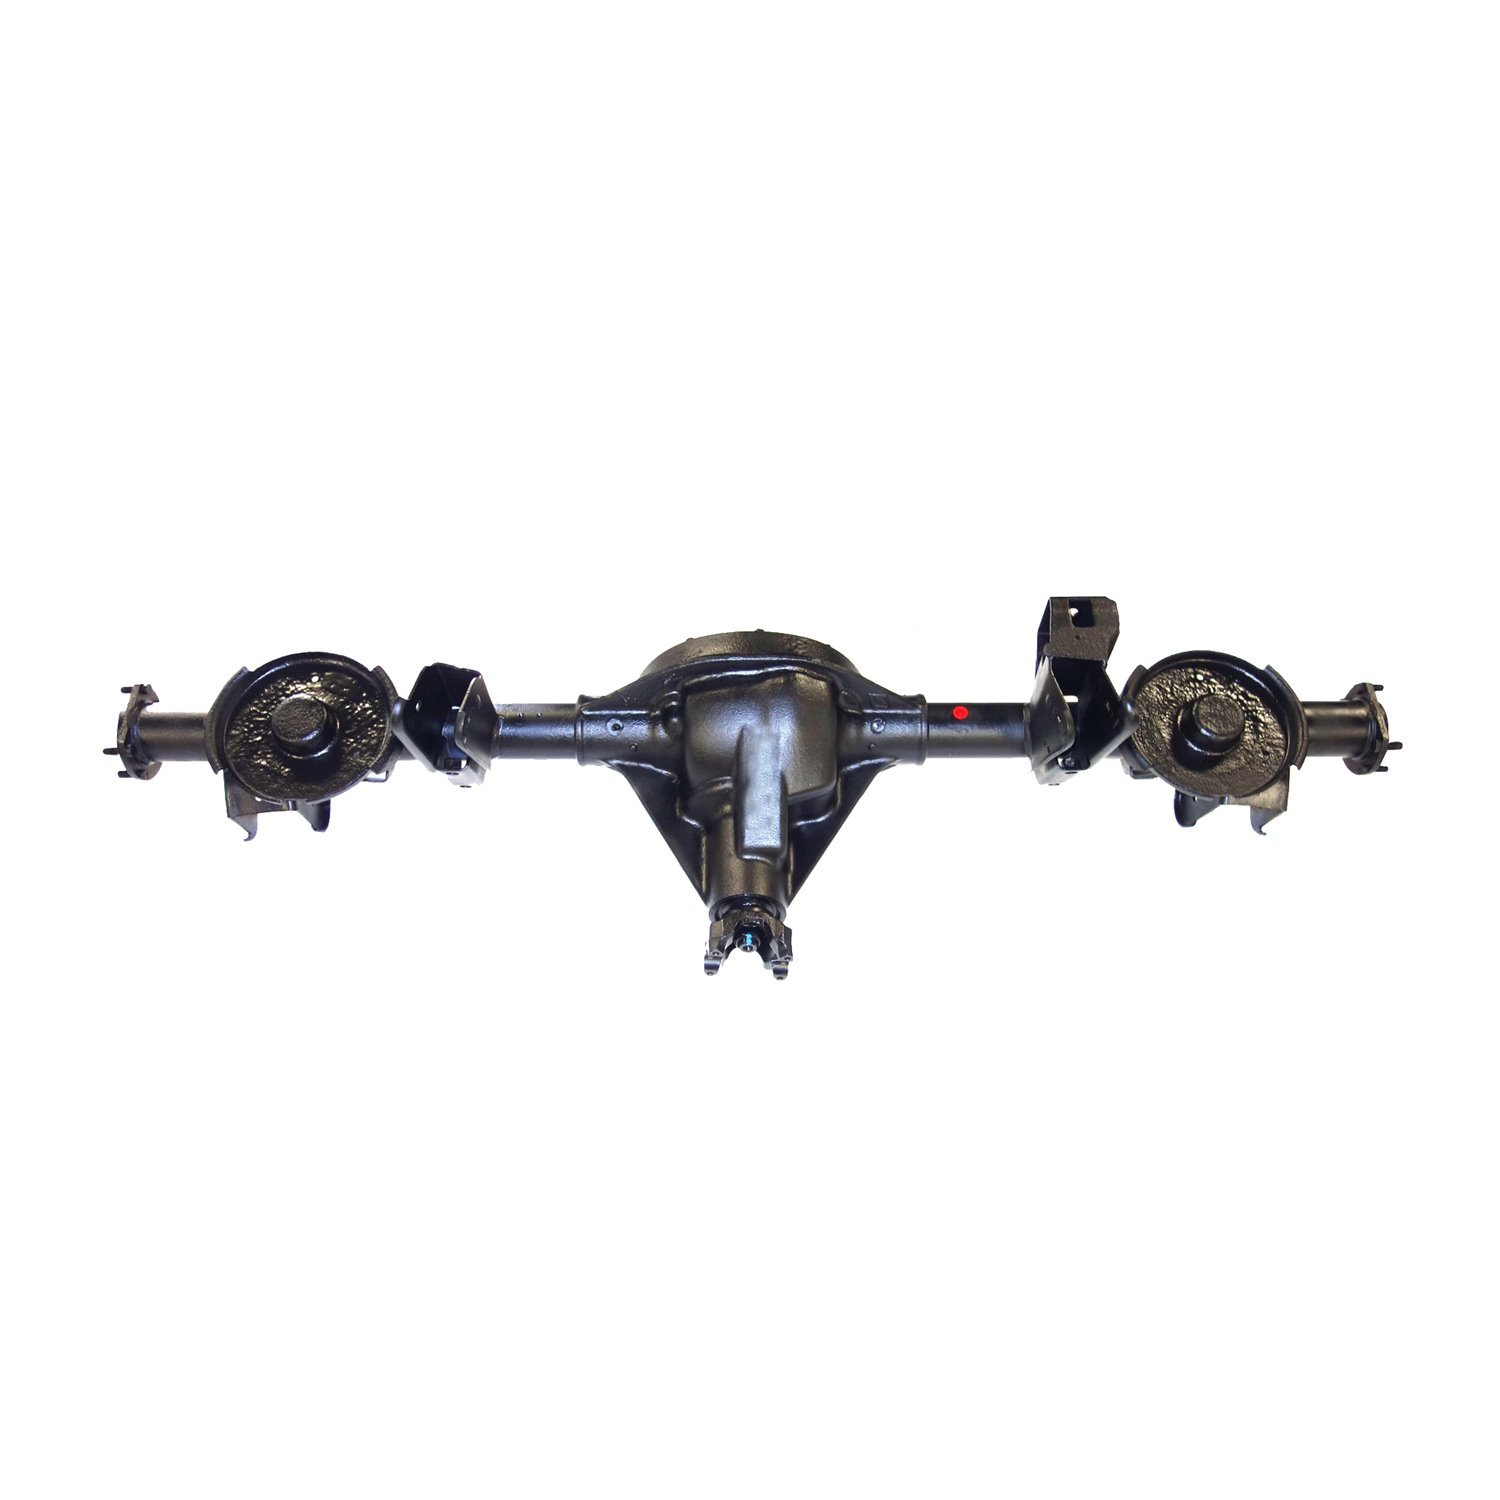 Remanufactured Complete Axle Assembly for Dana 35 99-04 Jeep Grand Cherokee 3.73 Ratio